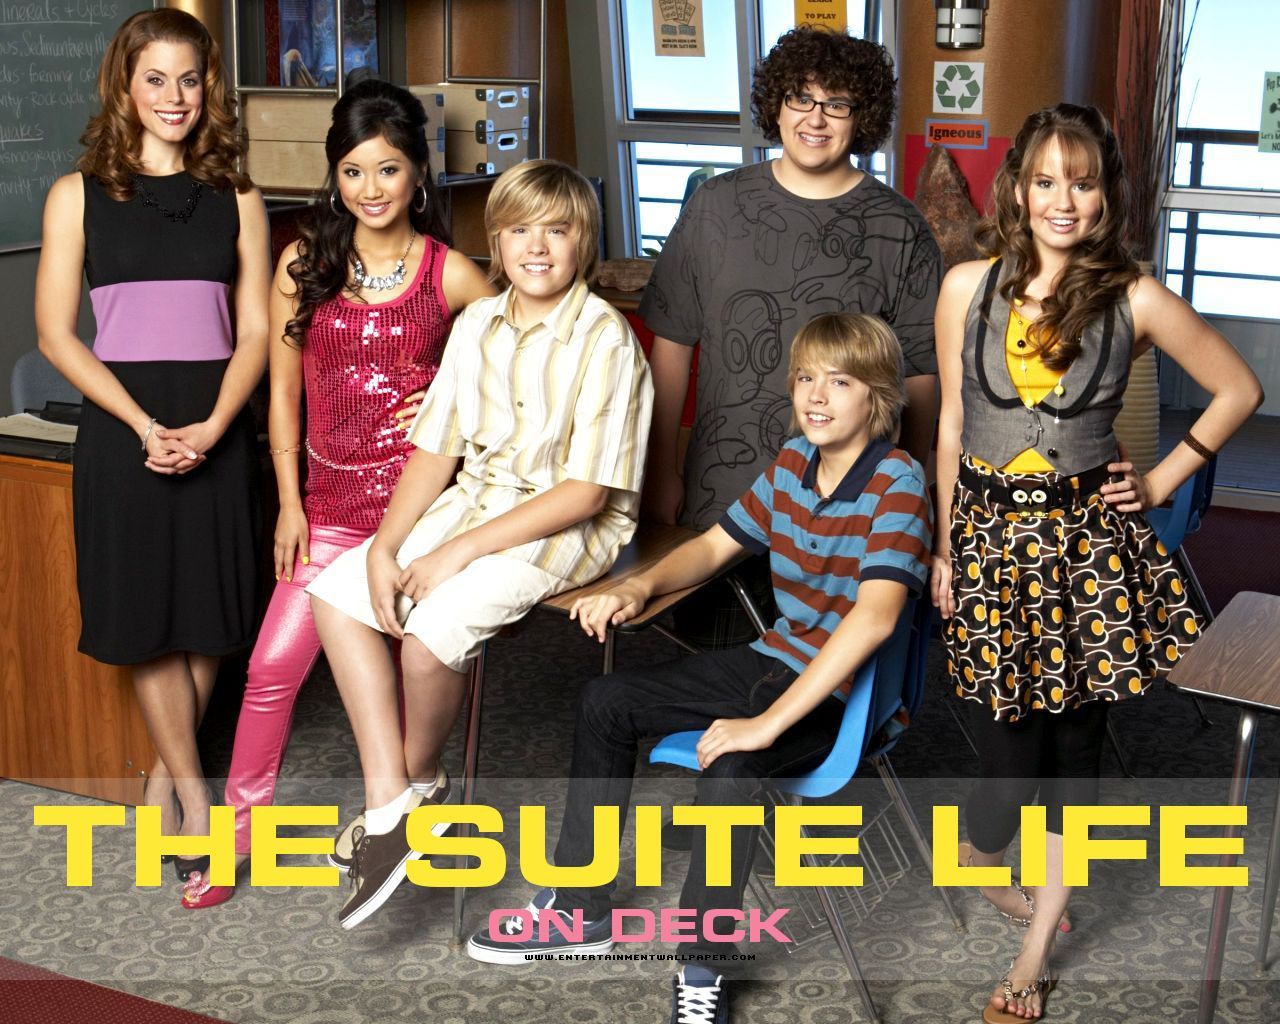 the suite life on deck. Suite life, Sweet life on deck, Suit life